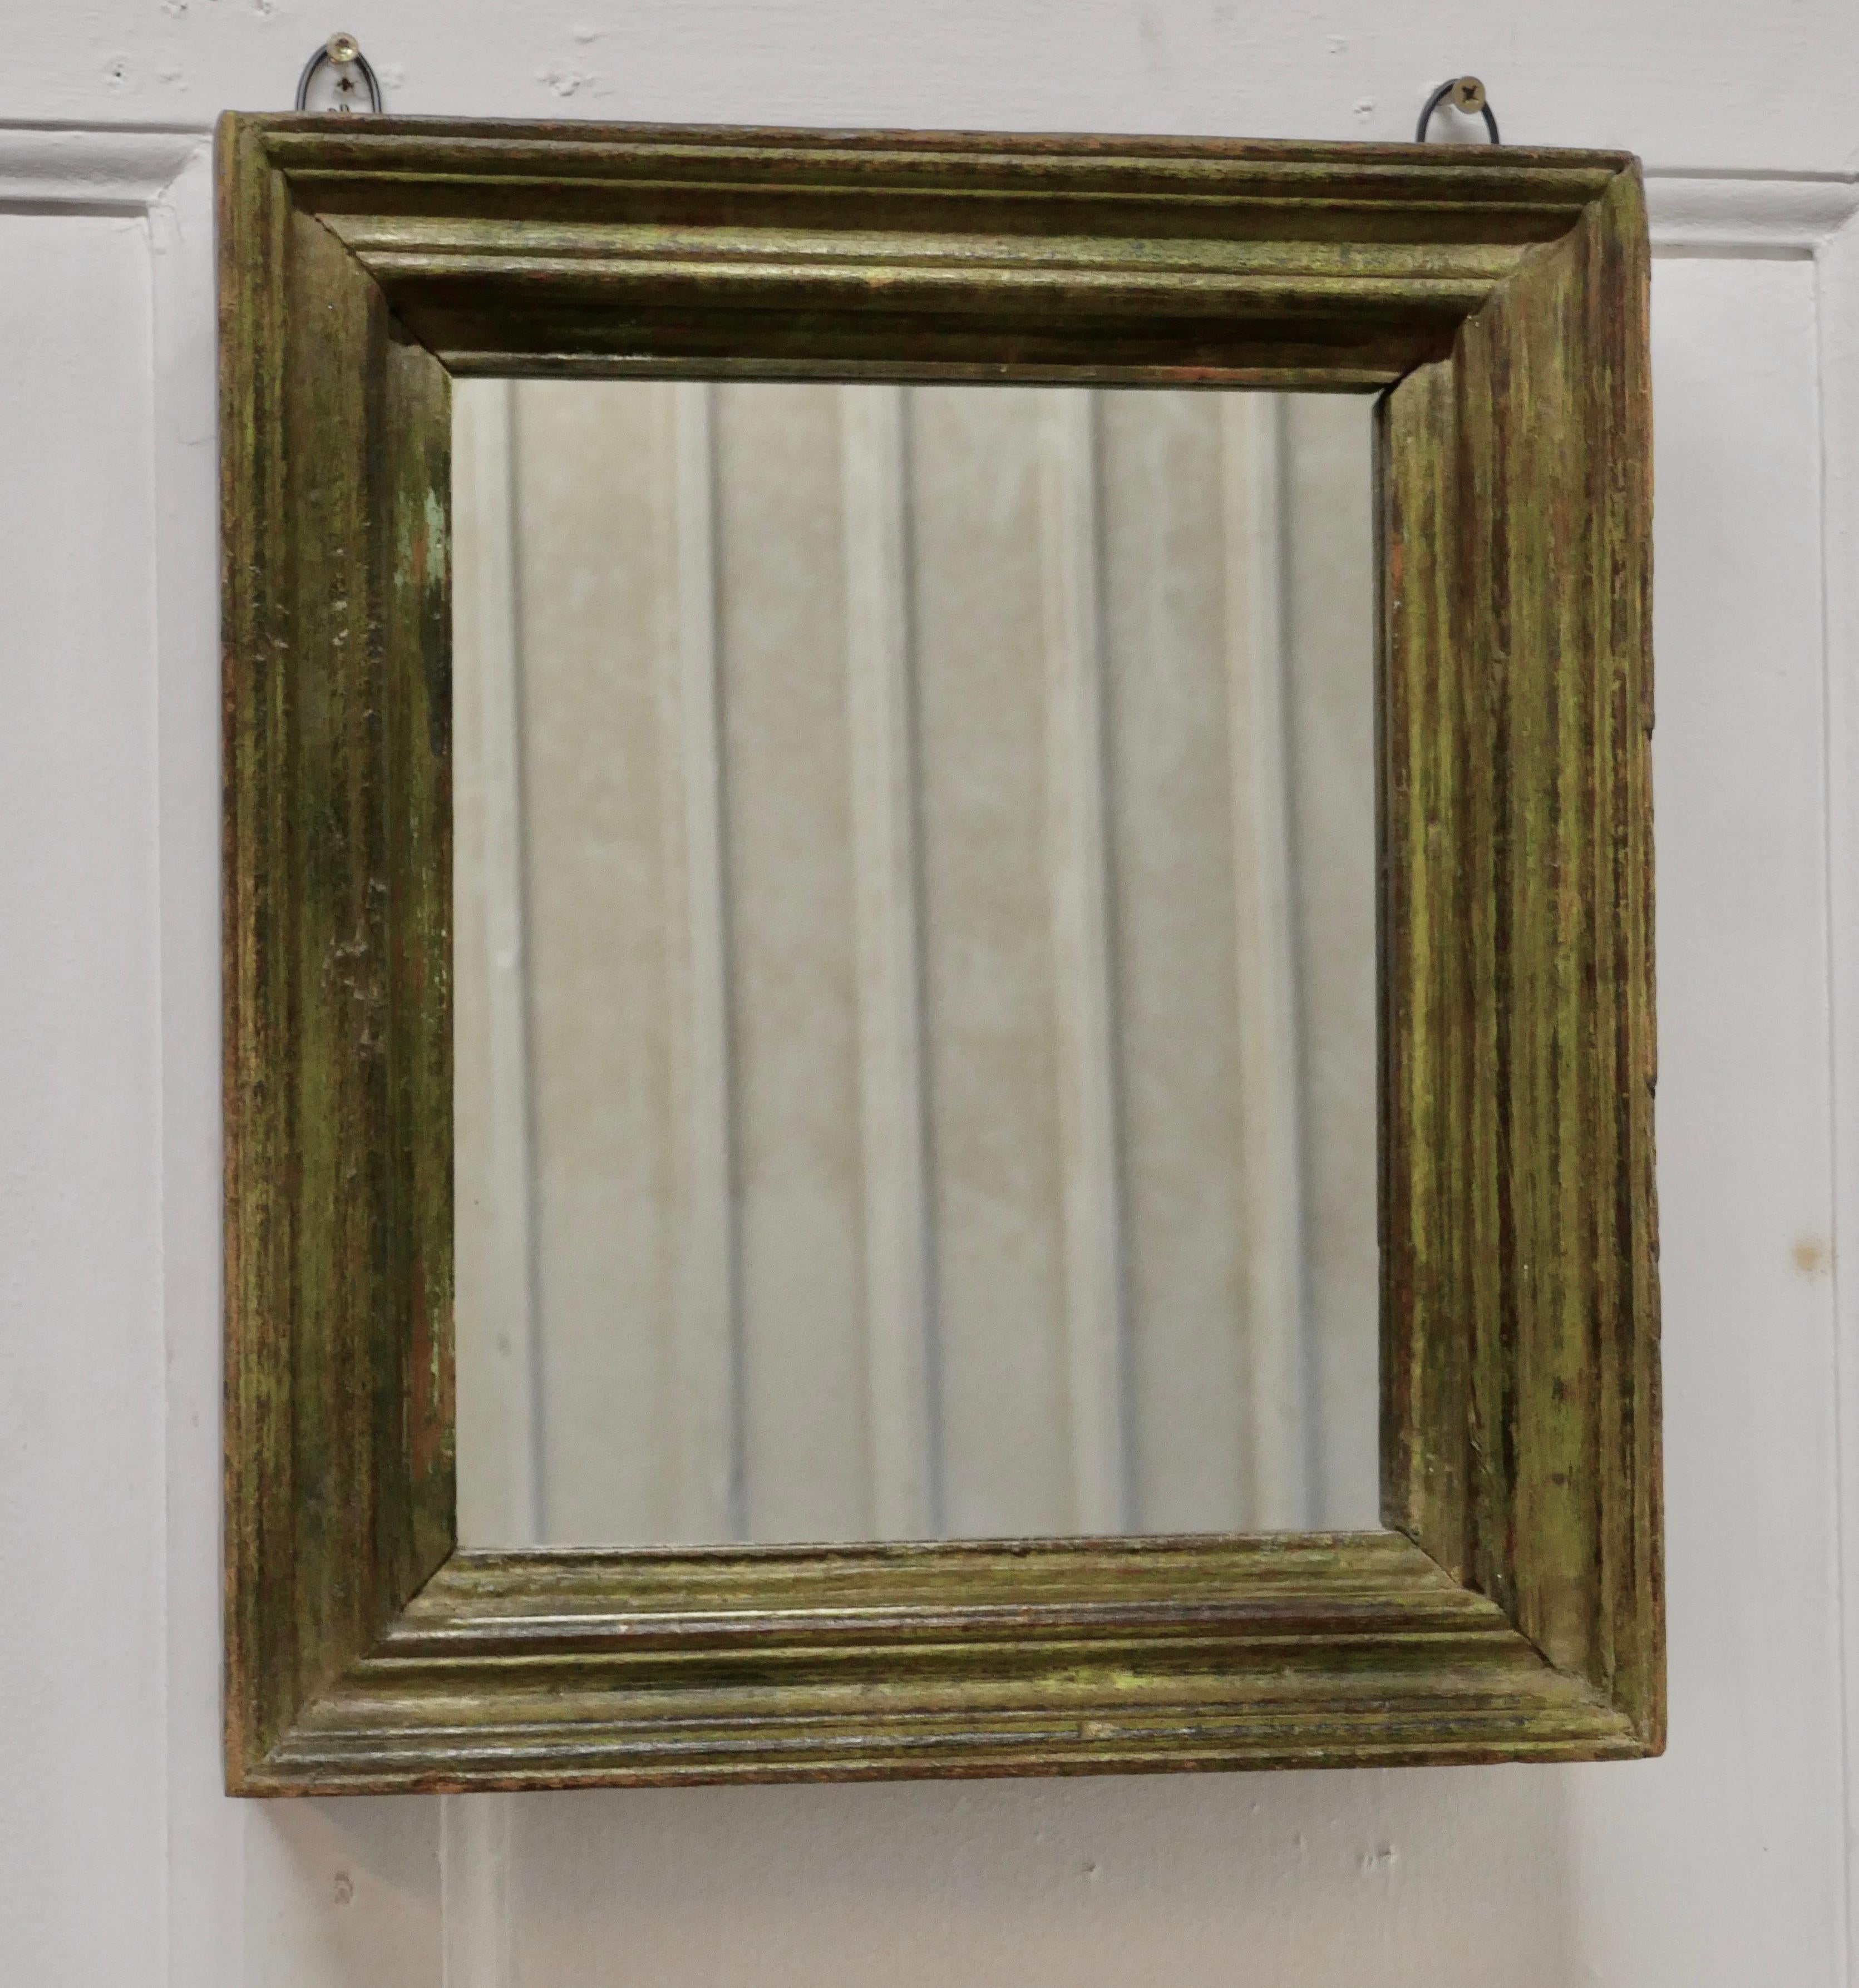 19th century French wall mirror with an old painted frame

The mirror has a simple moulded 2.5” wide wooden frame with old shabby green paint
The glass is in good condition and seems to be have been replaced at some time
A good attractive piece